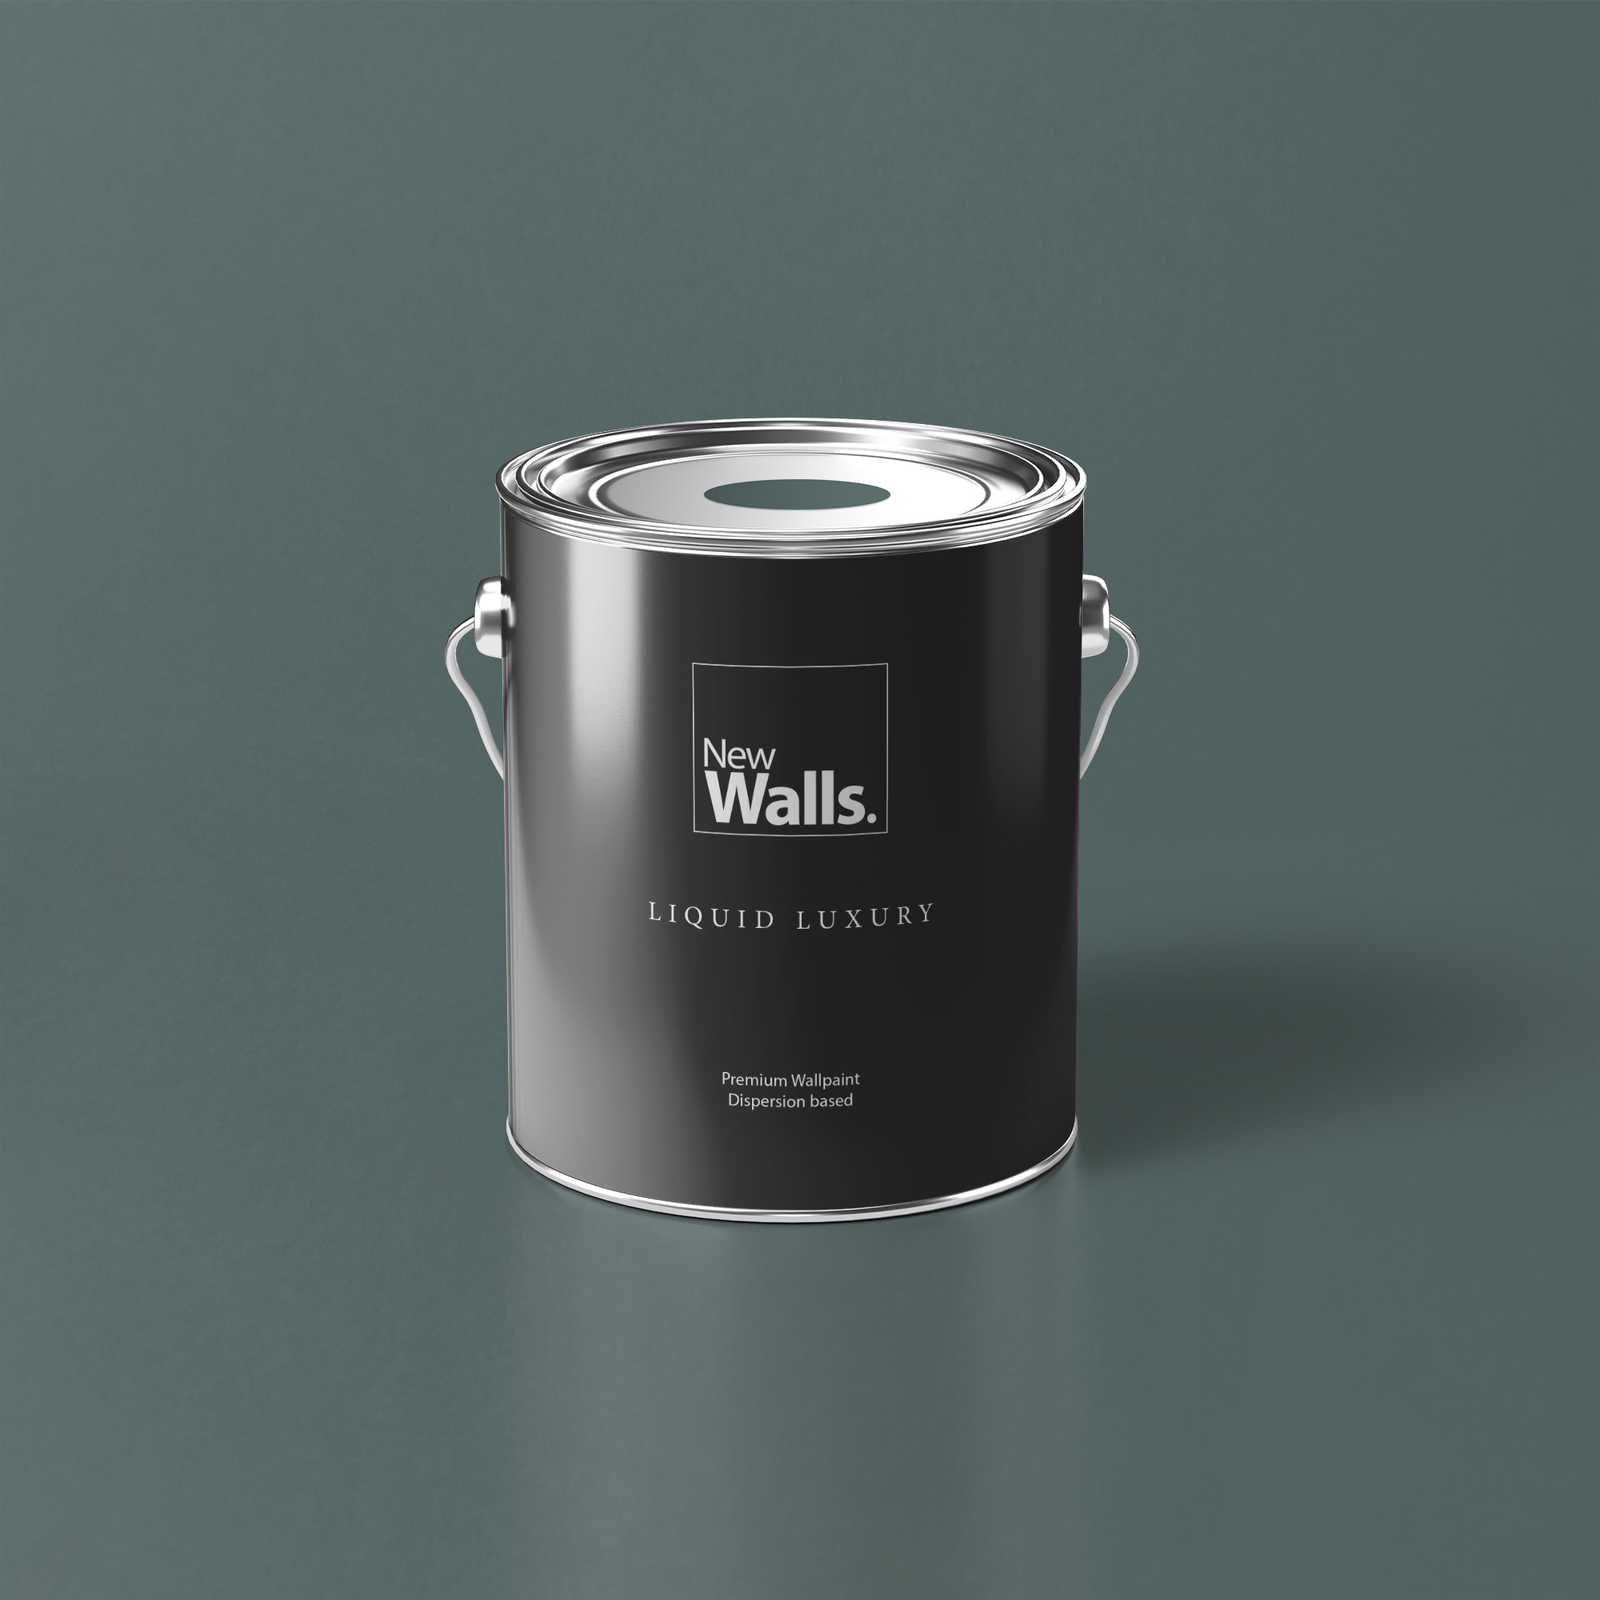 Premium Wall Paint Relaxing Grey Green »Sweet Sage« NW405 – 5 litre
